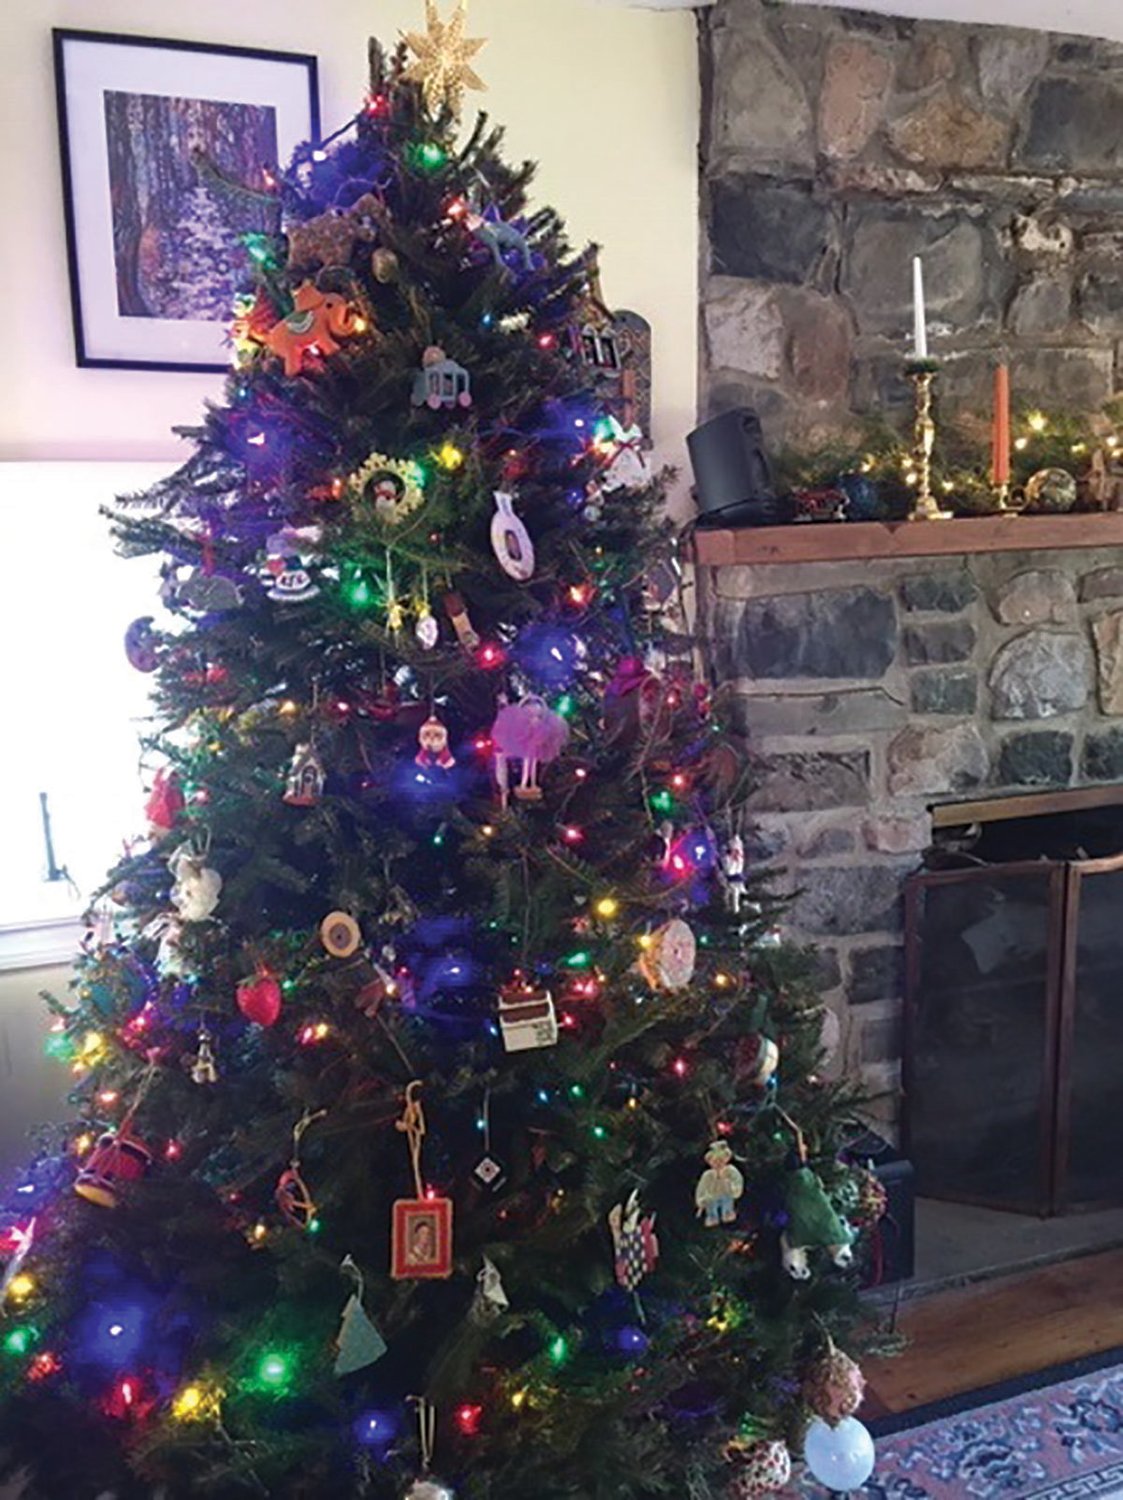 The Clark house is filled with the scent of Norway spruce.